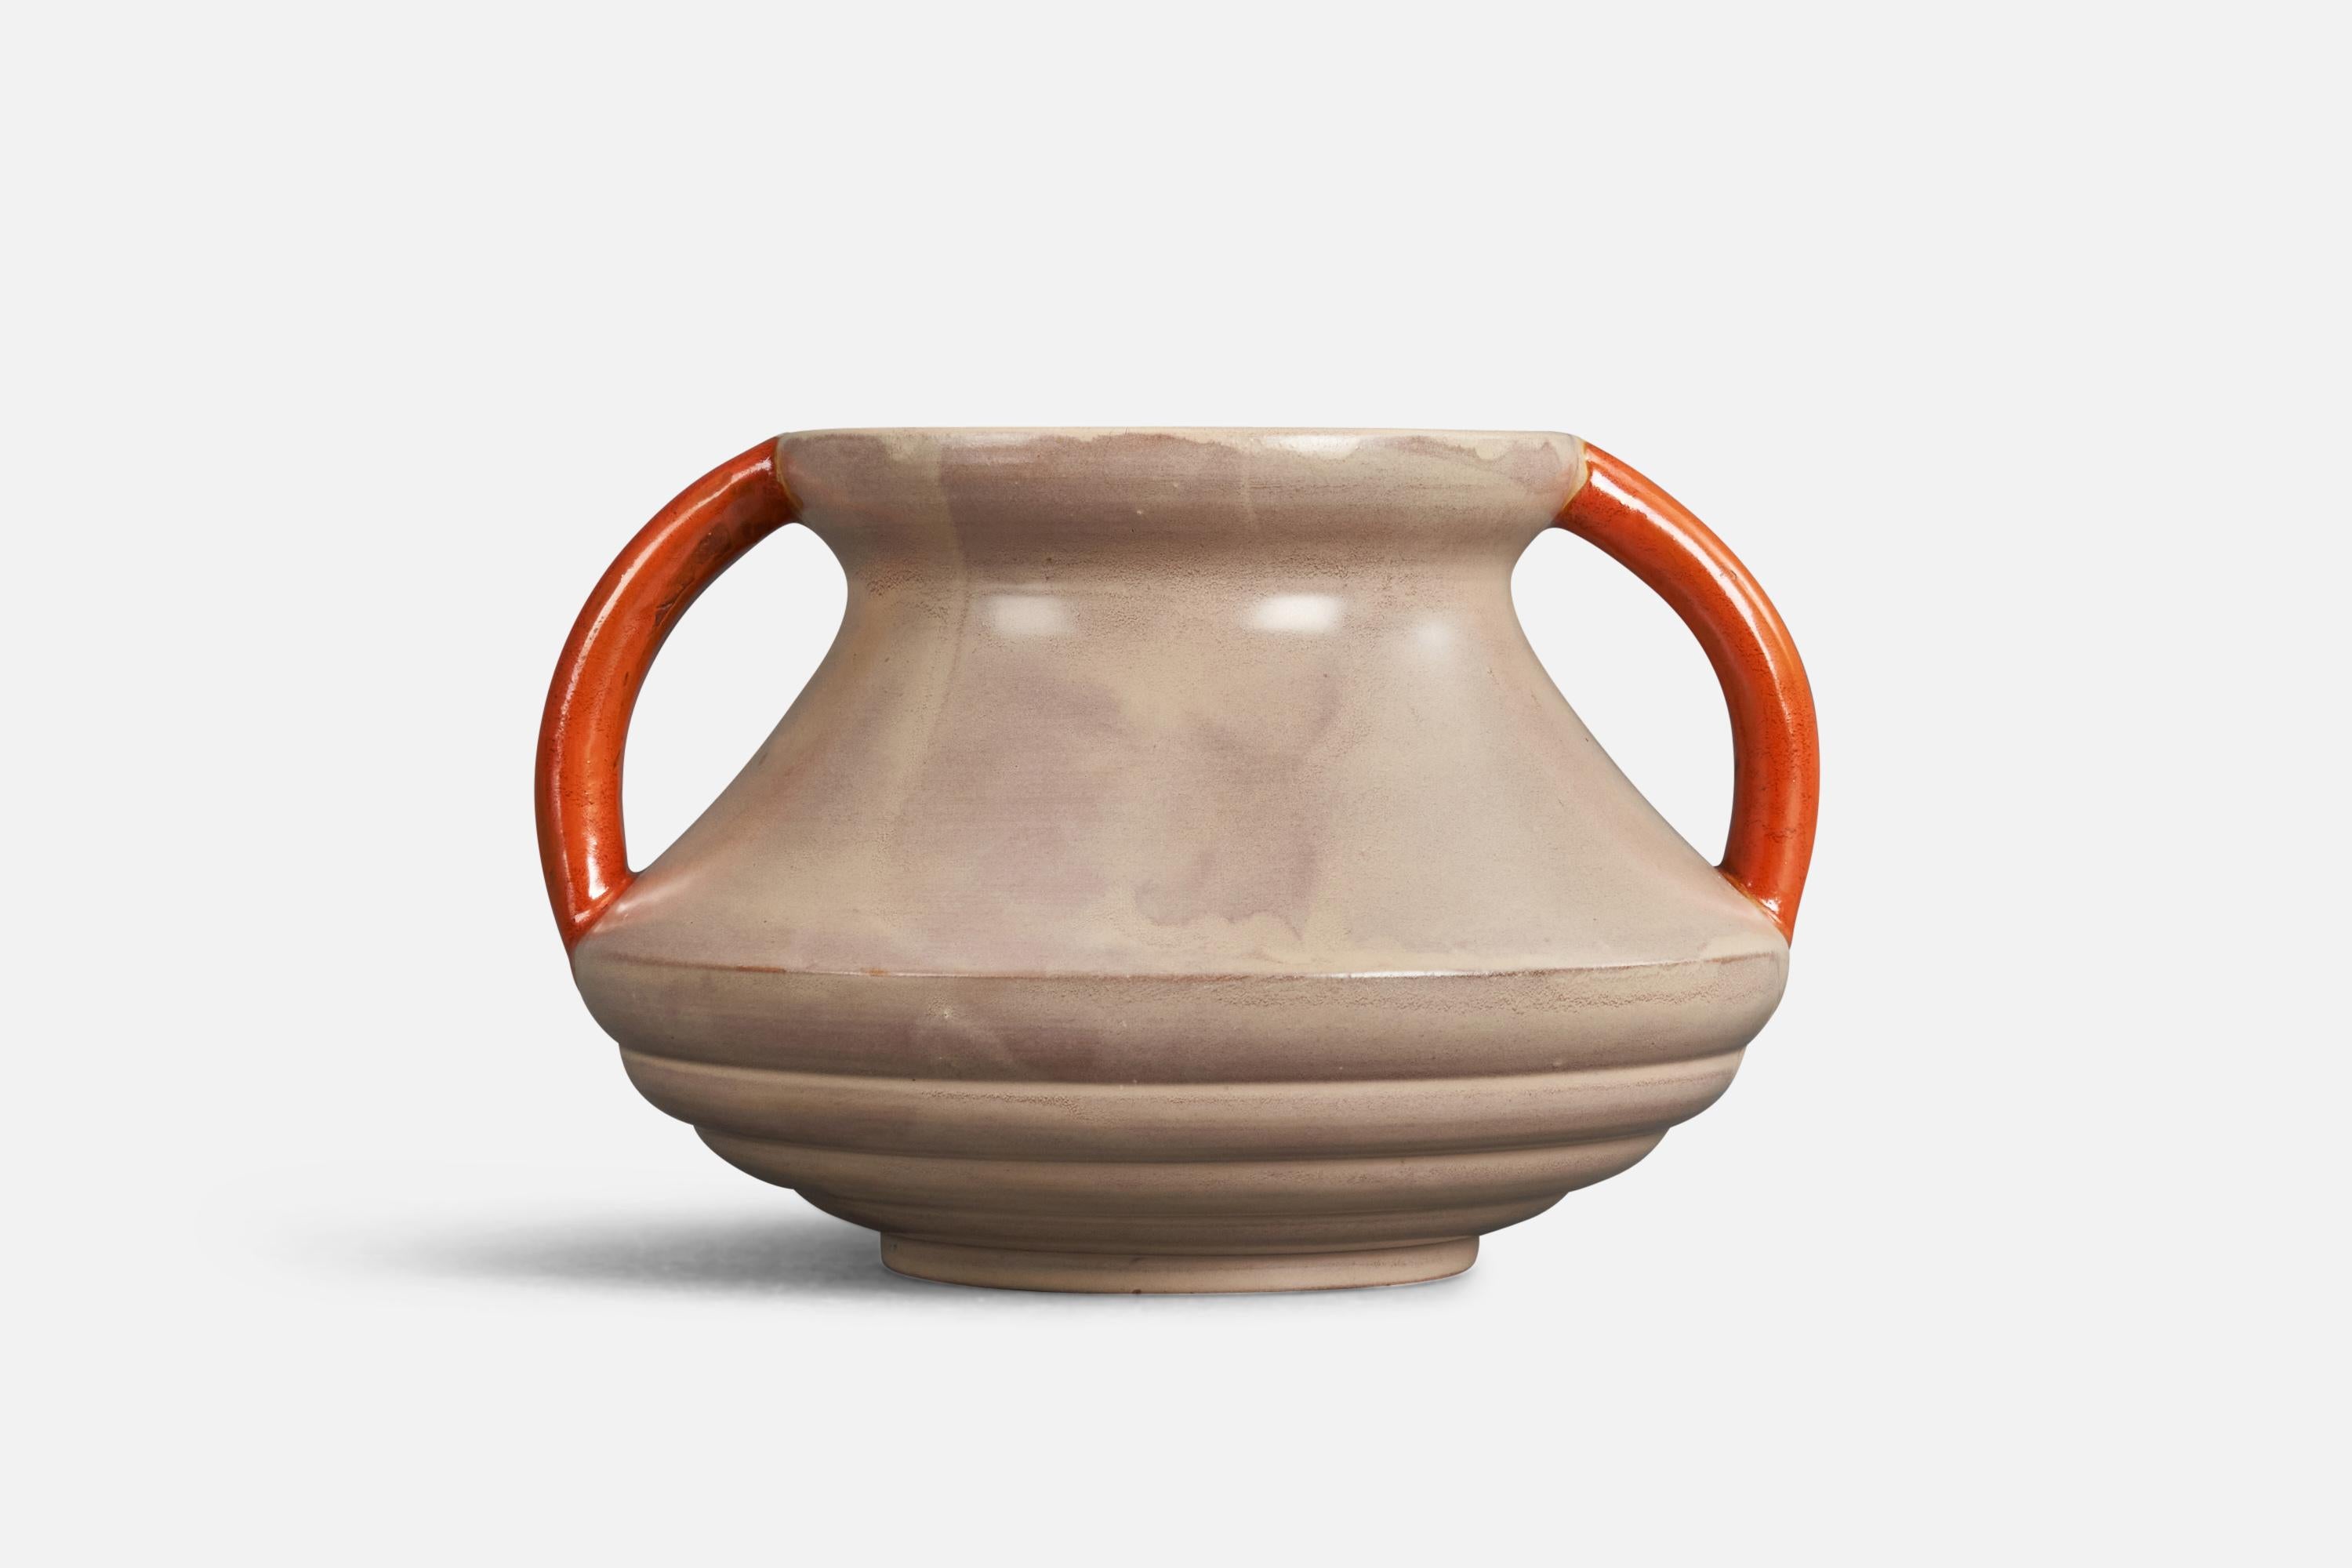 A stoneware vase designed by Andersson & Johansson and produced in Höganäs, Sweden, 1940s.